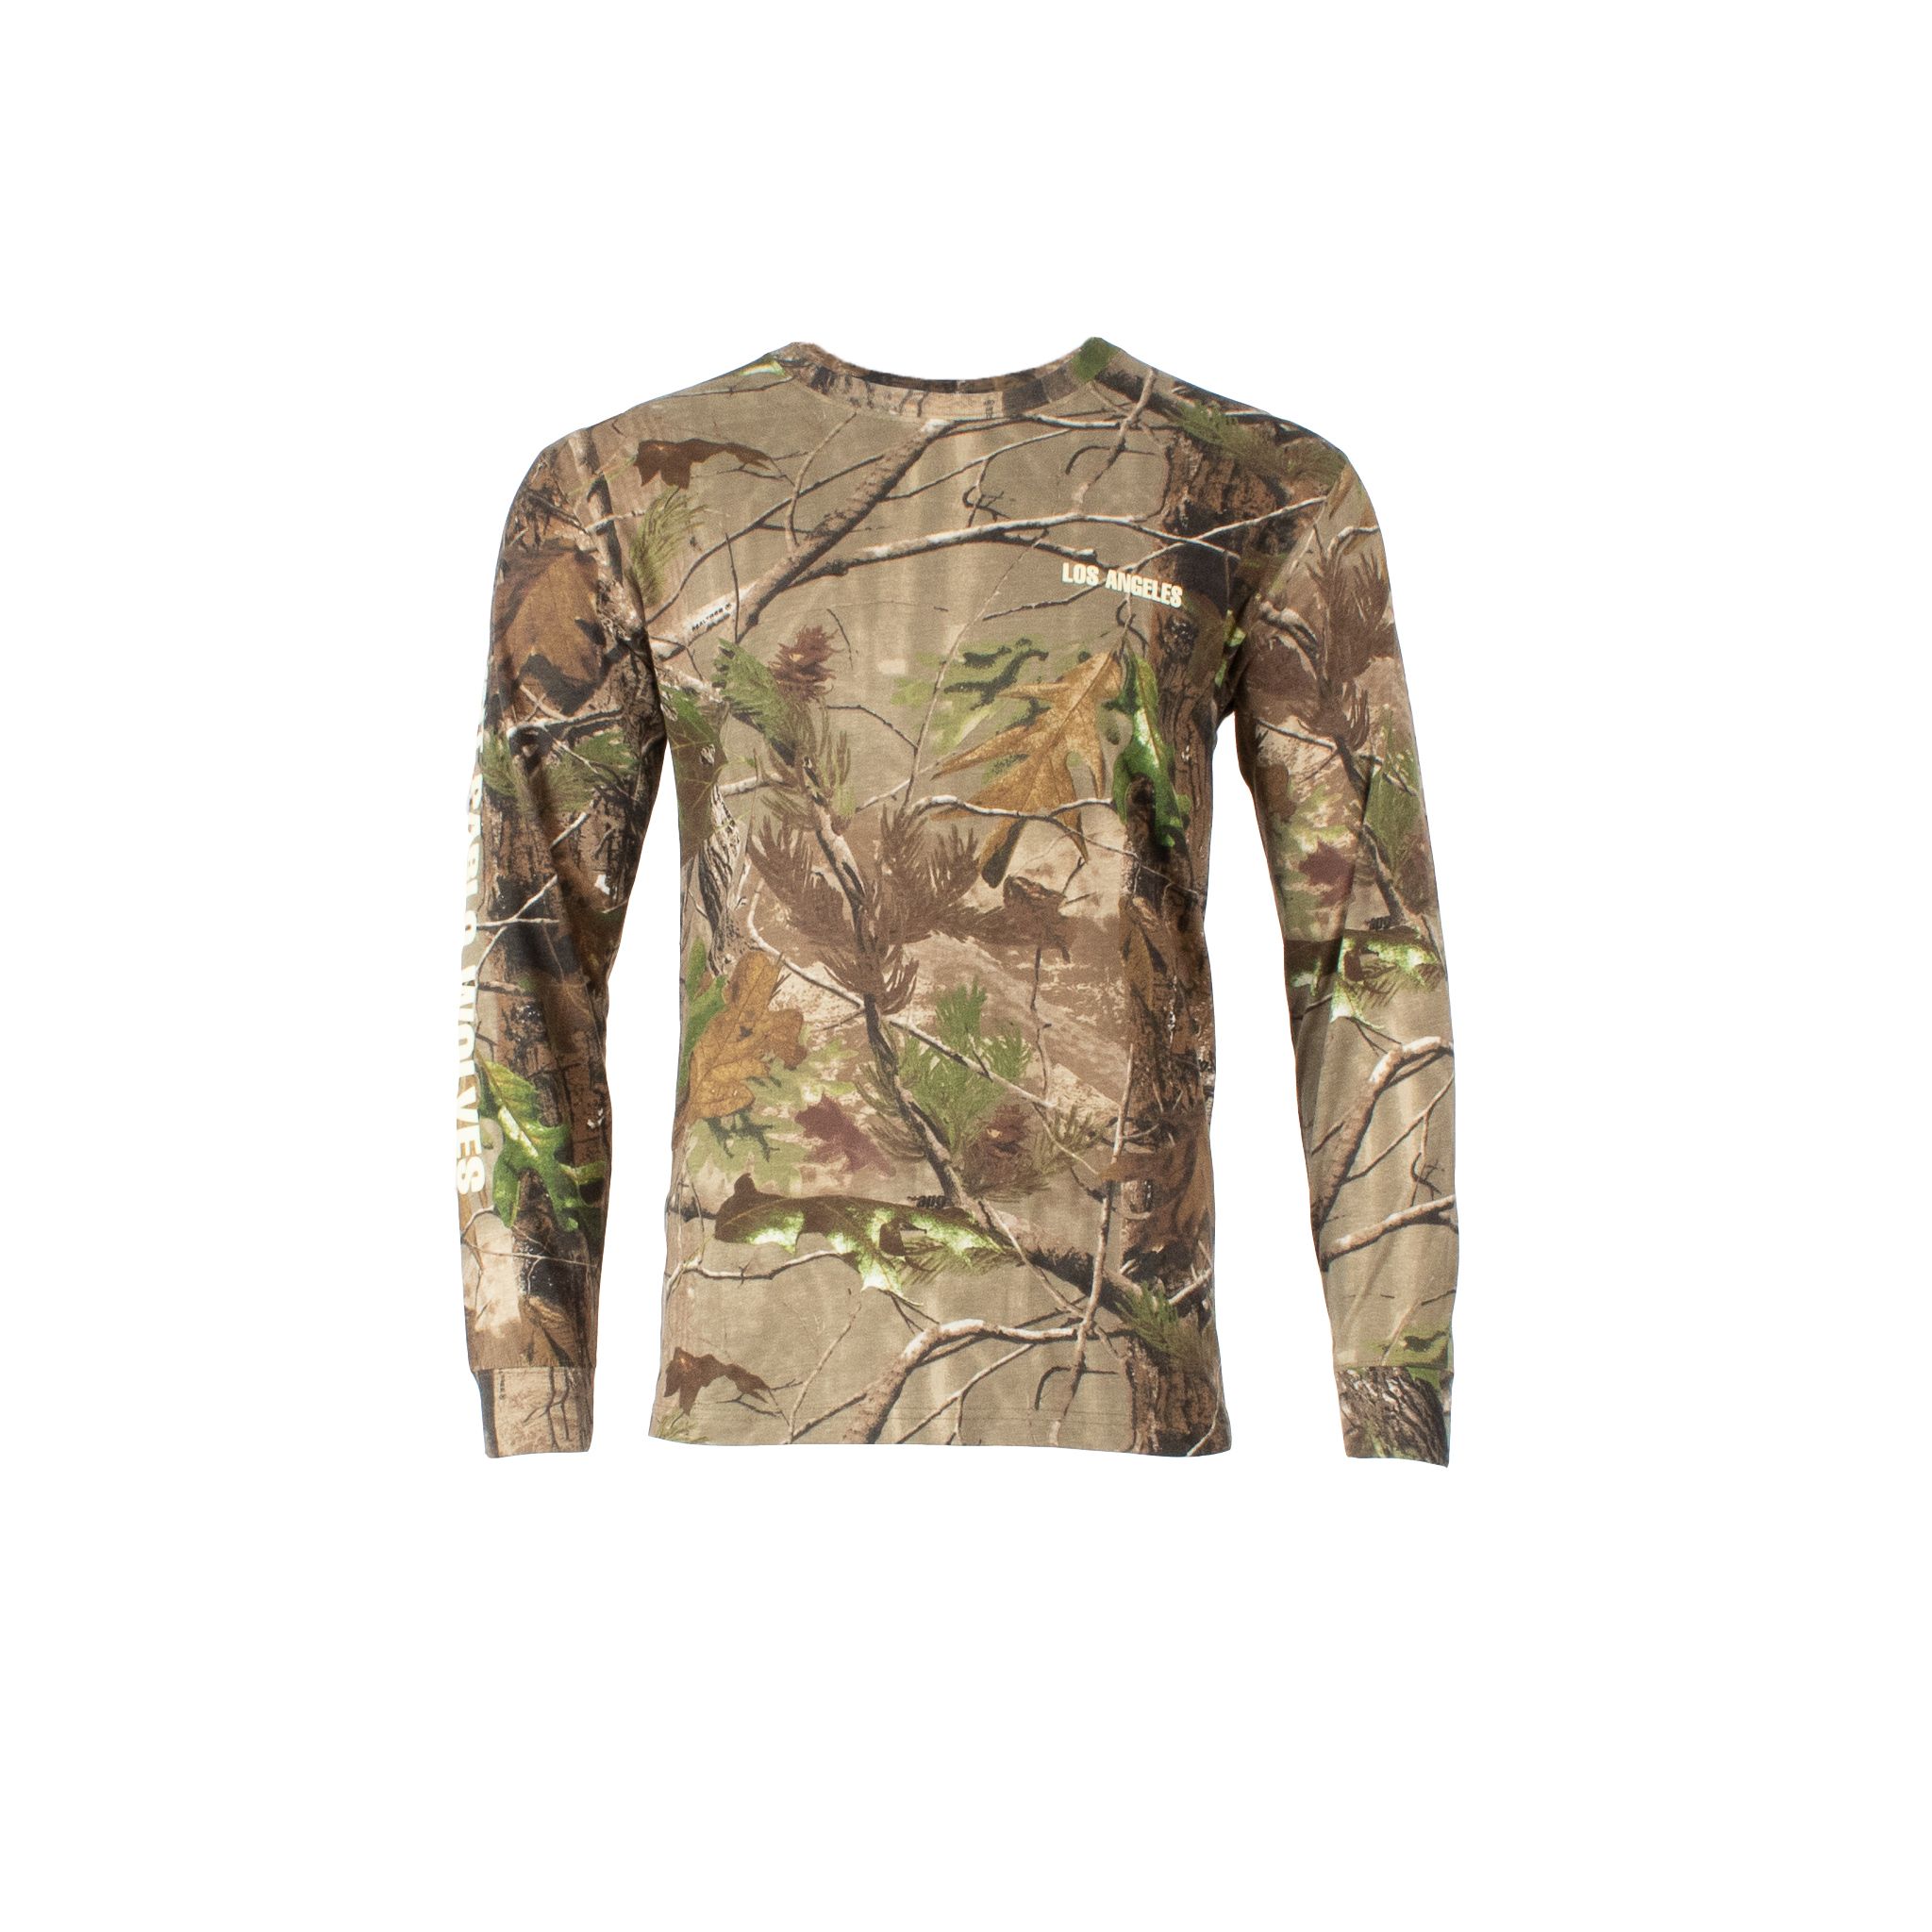 Kanye West Saint Pablo Tour Long Sleeve Shirt in Camo by Max